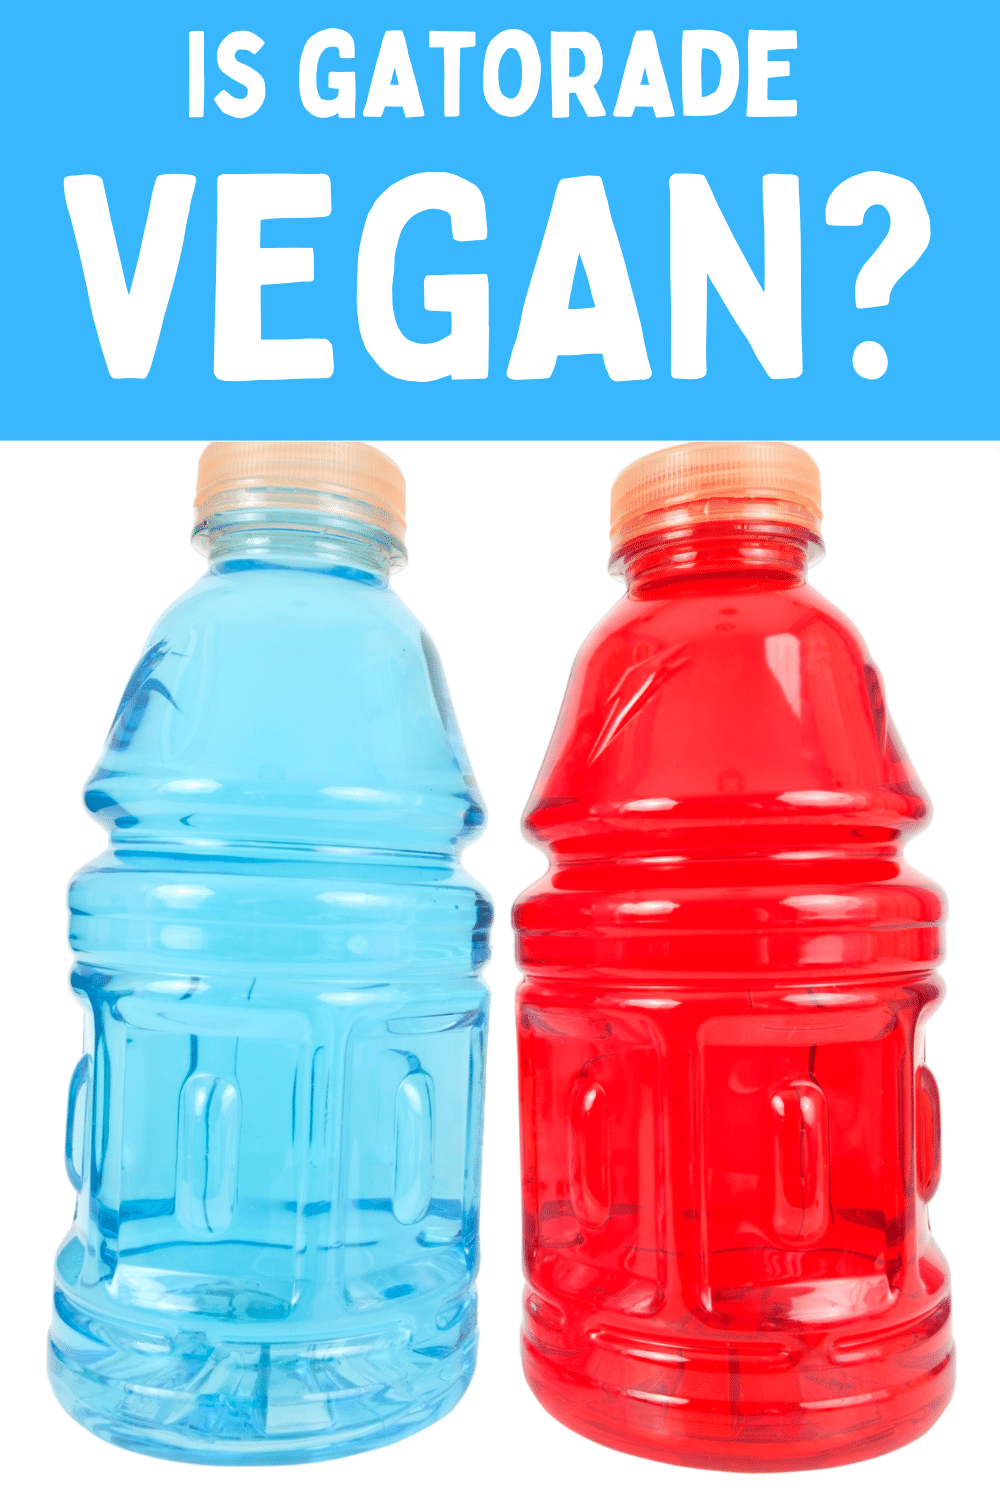 text overlay: is gatorade vegan?, pictured are two plastic bottles, one with red liquid and one with blue liquid, both have orange caps